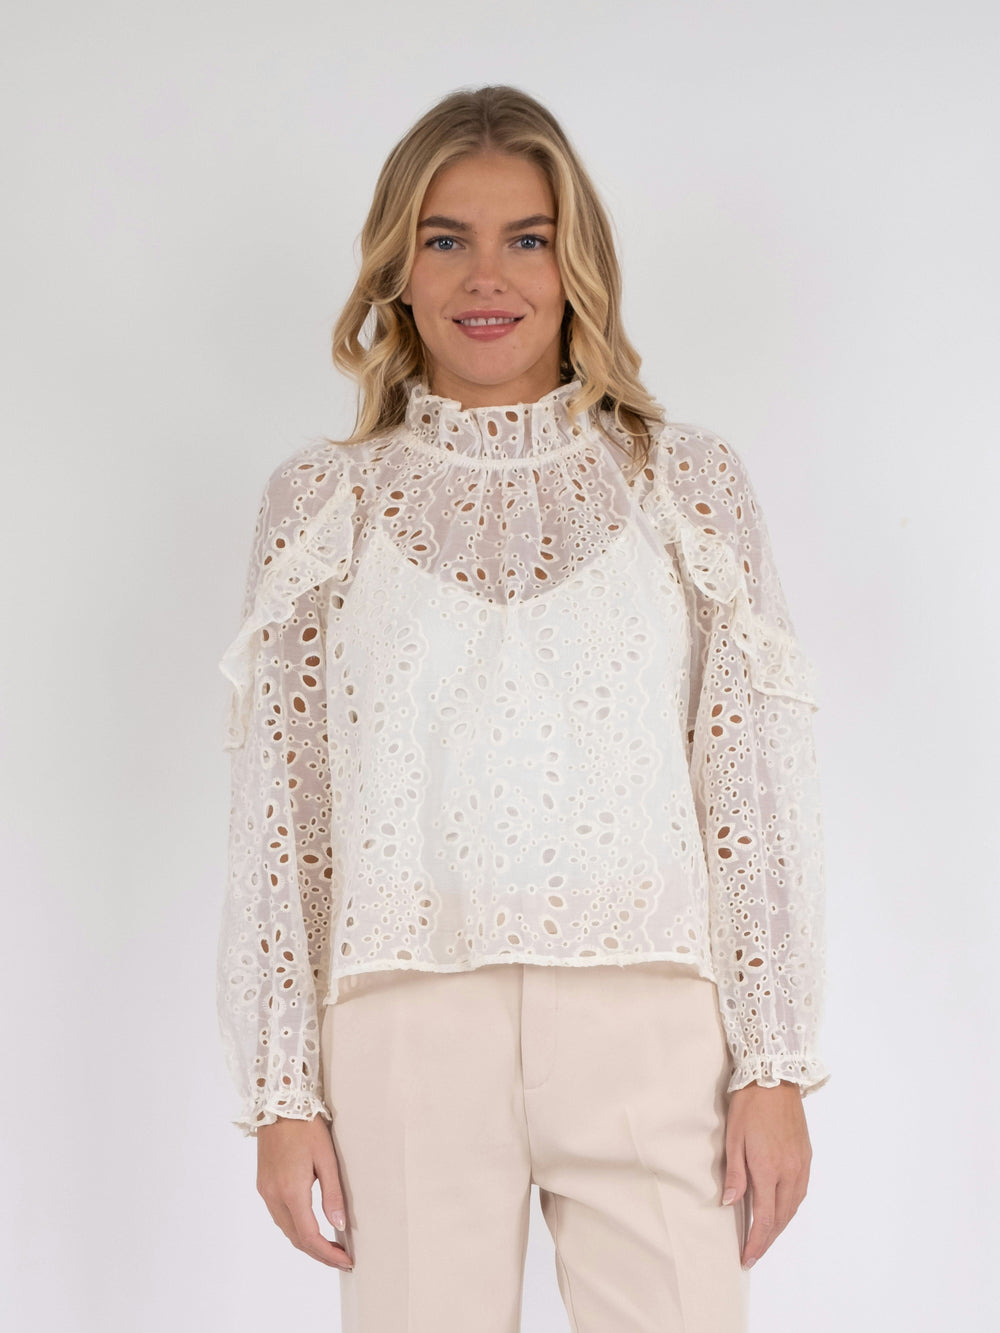 Neo Noir - Nadira Embroidery Blouse - Ivory